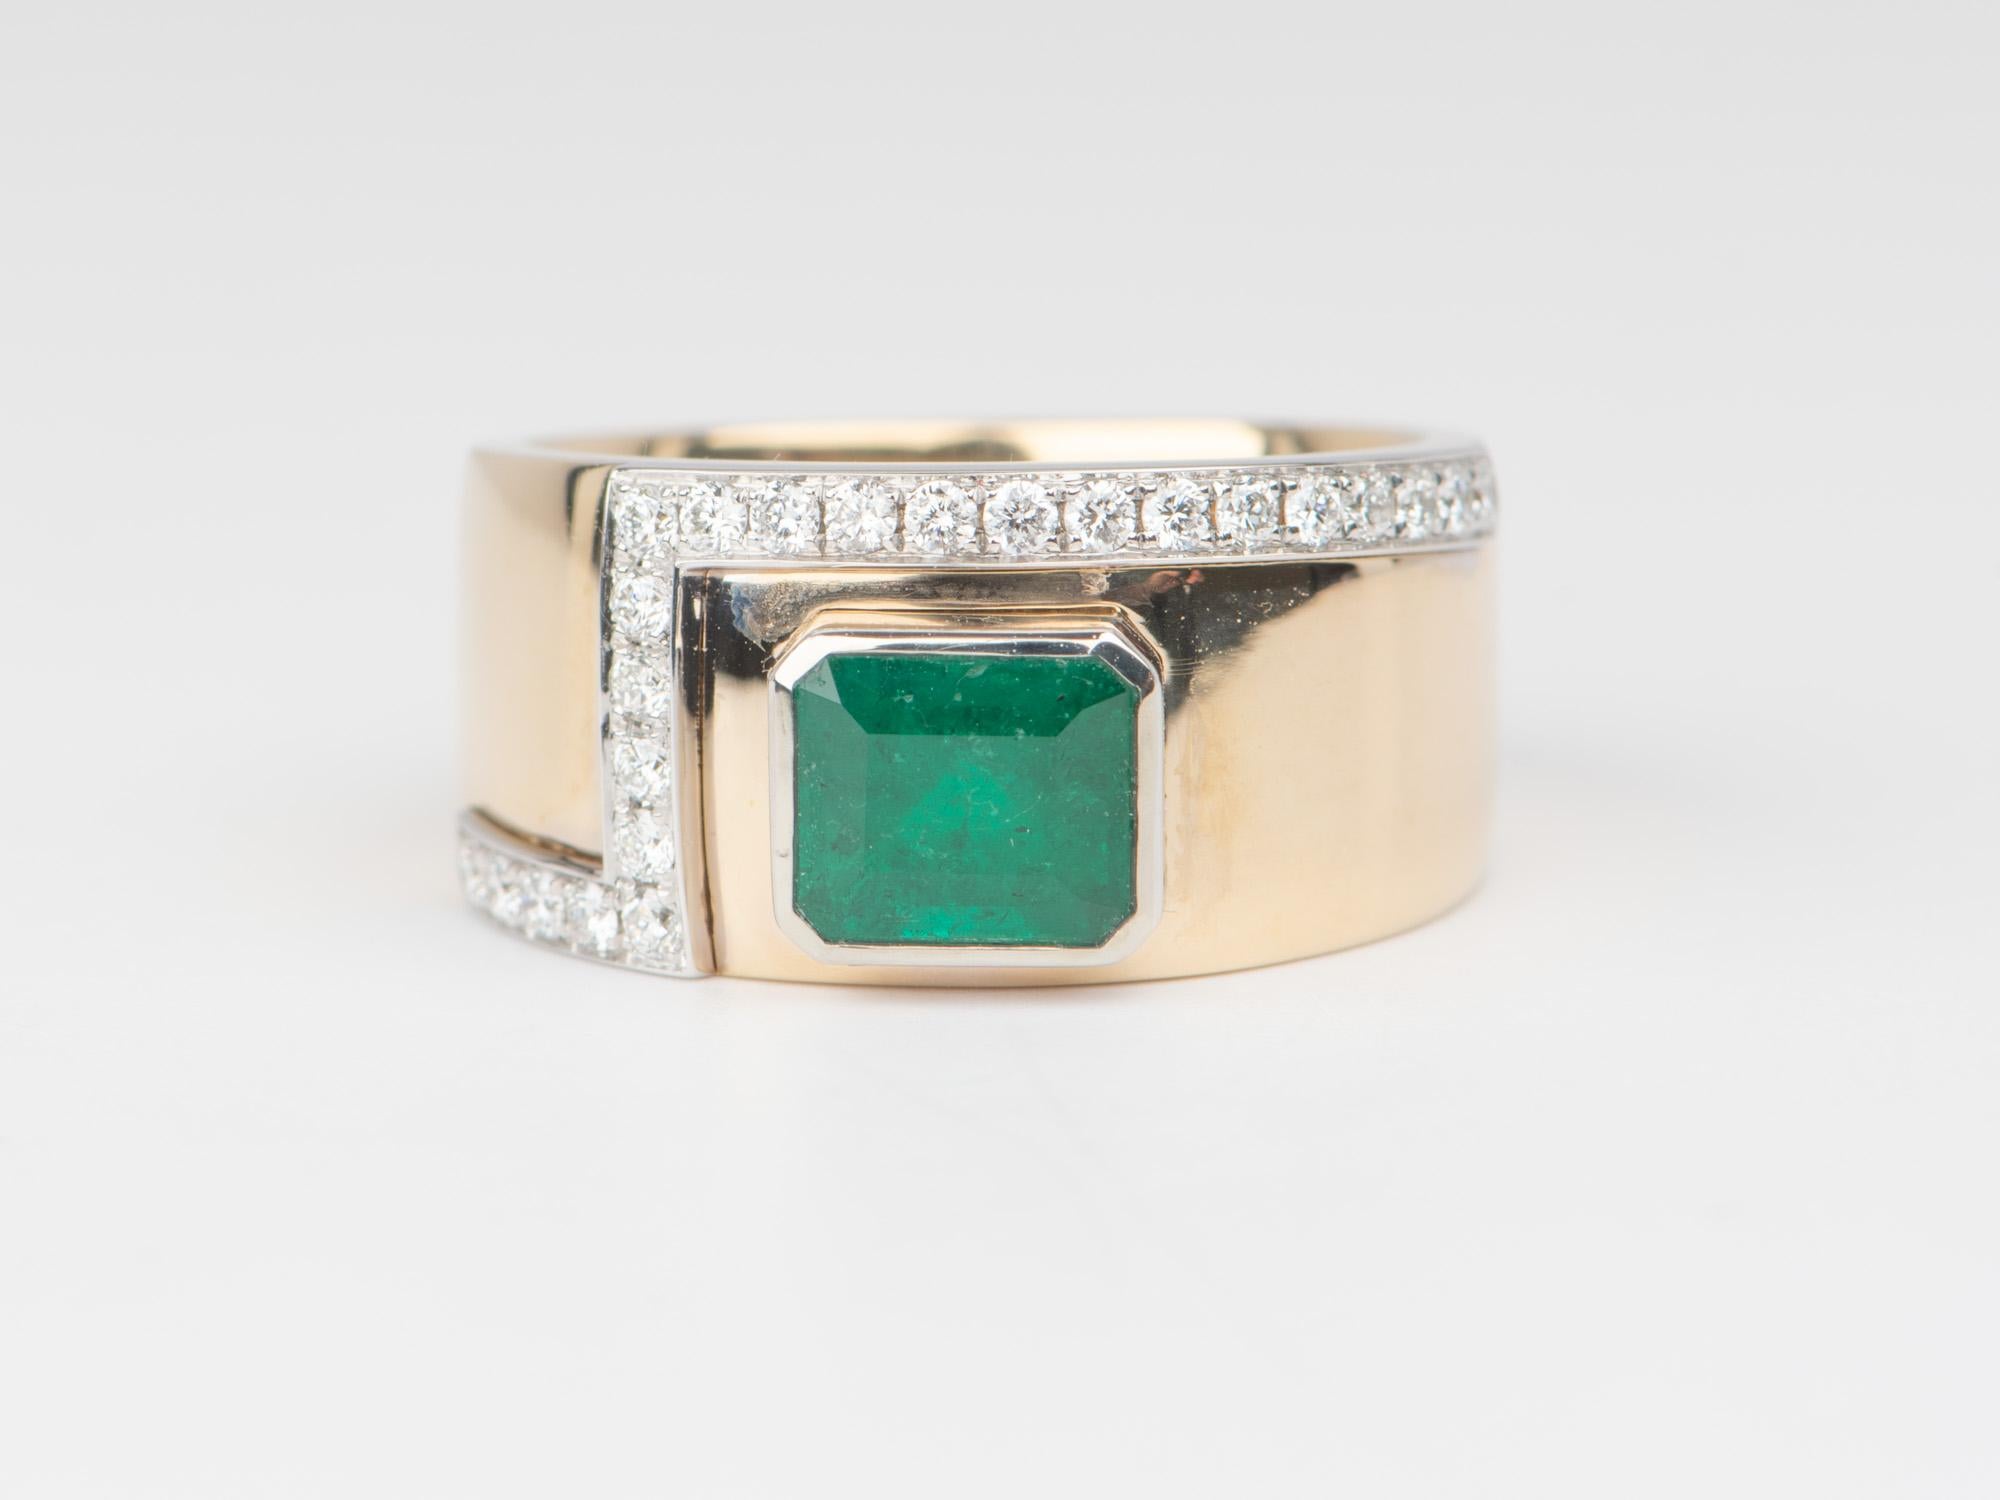 ♥ A wide band ring featuring a deep green emerald and a zig-zap line of diamond accent across the band
♥ The band is in solid 14K yellow gold, while the diamonds are set in 14K white gold for a subdued color contrast and interest in its design
♥ The